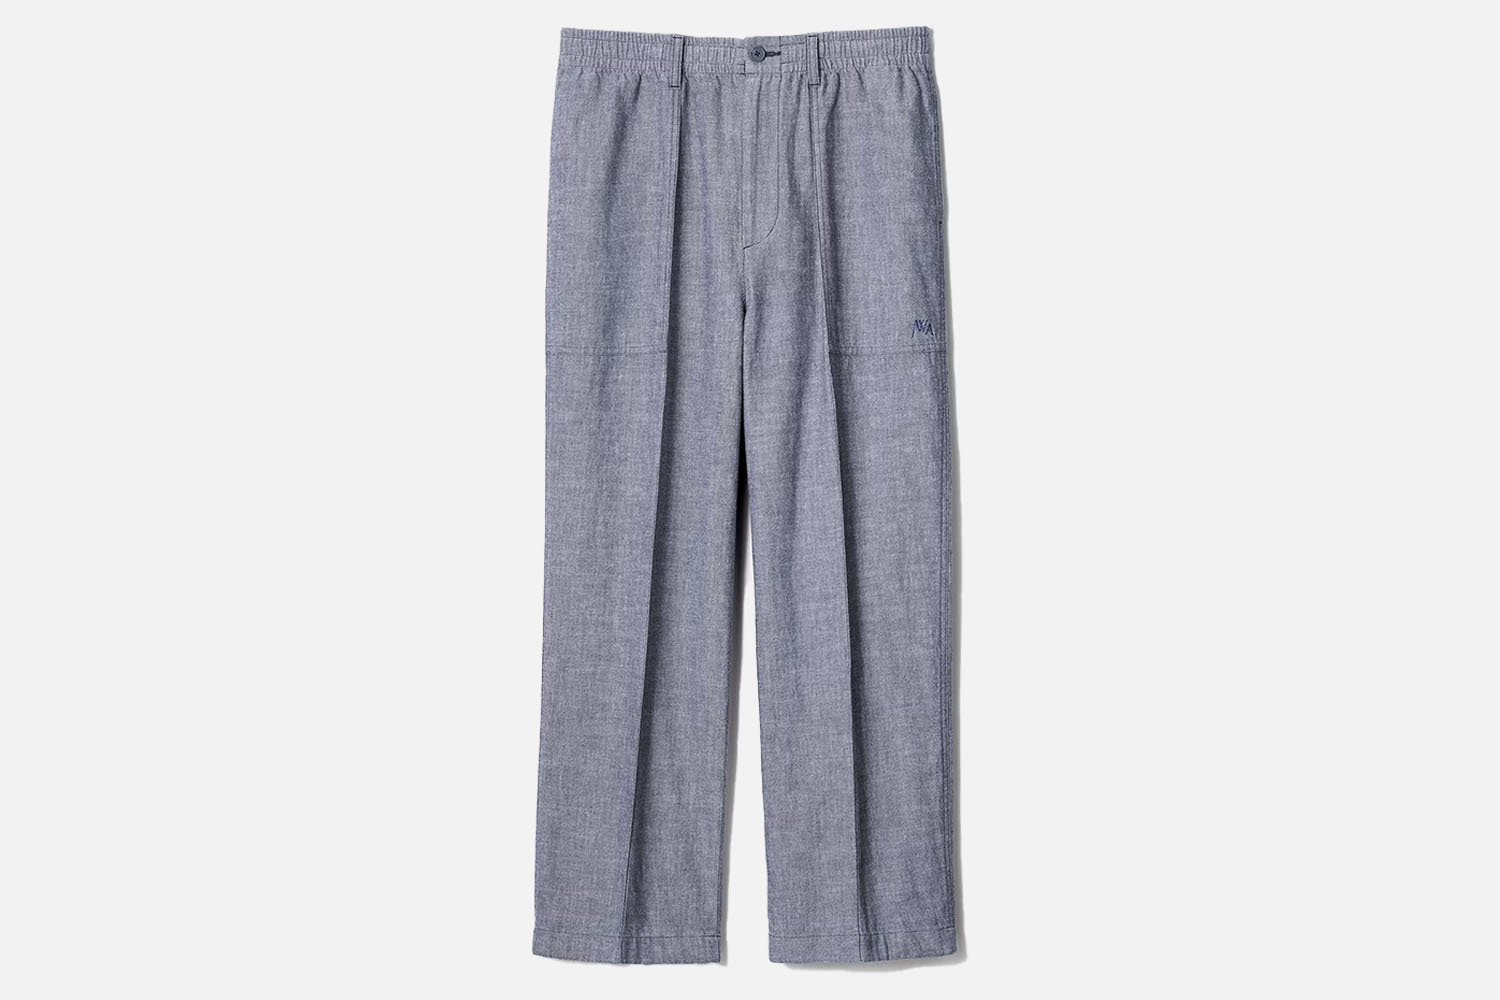 The Office-Appropriate Summer Trousers: Uniqlo x JW Anderson Linen-Blend Relaxed Pants